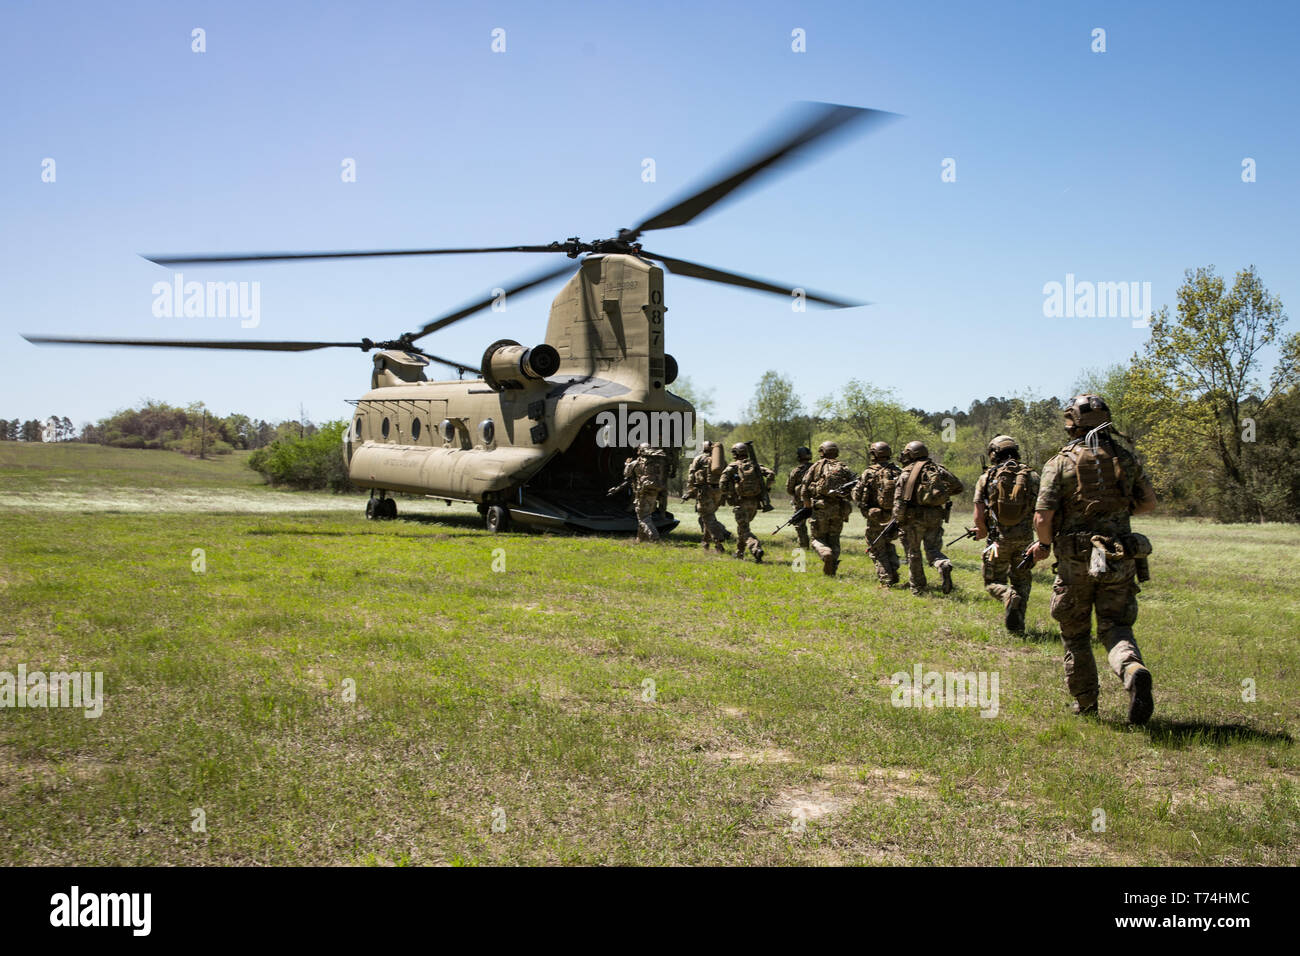 Green Berets assigned to 3rd Special Forces Group (Airborne) enter the back of a CH-47 Chinook helicopter after conducting a raid during a routine training mission April 10, 2019 at Camp Mackal, NC. The Green Berets focused on utilizing new communication systems and casualty care during the training mission. (U.S. Army Photo by Sgt. Steven Lewis) Stock Photo